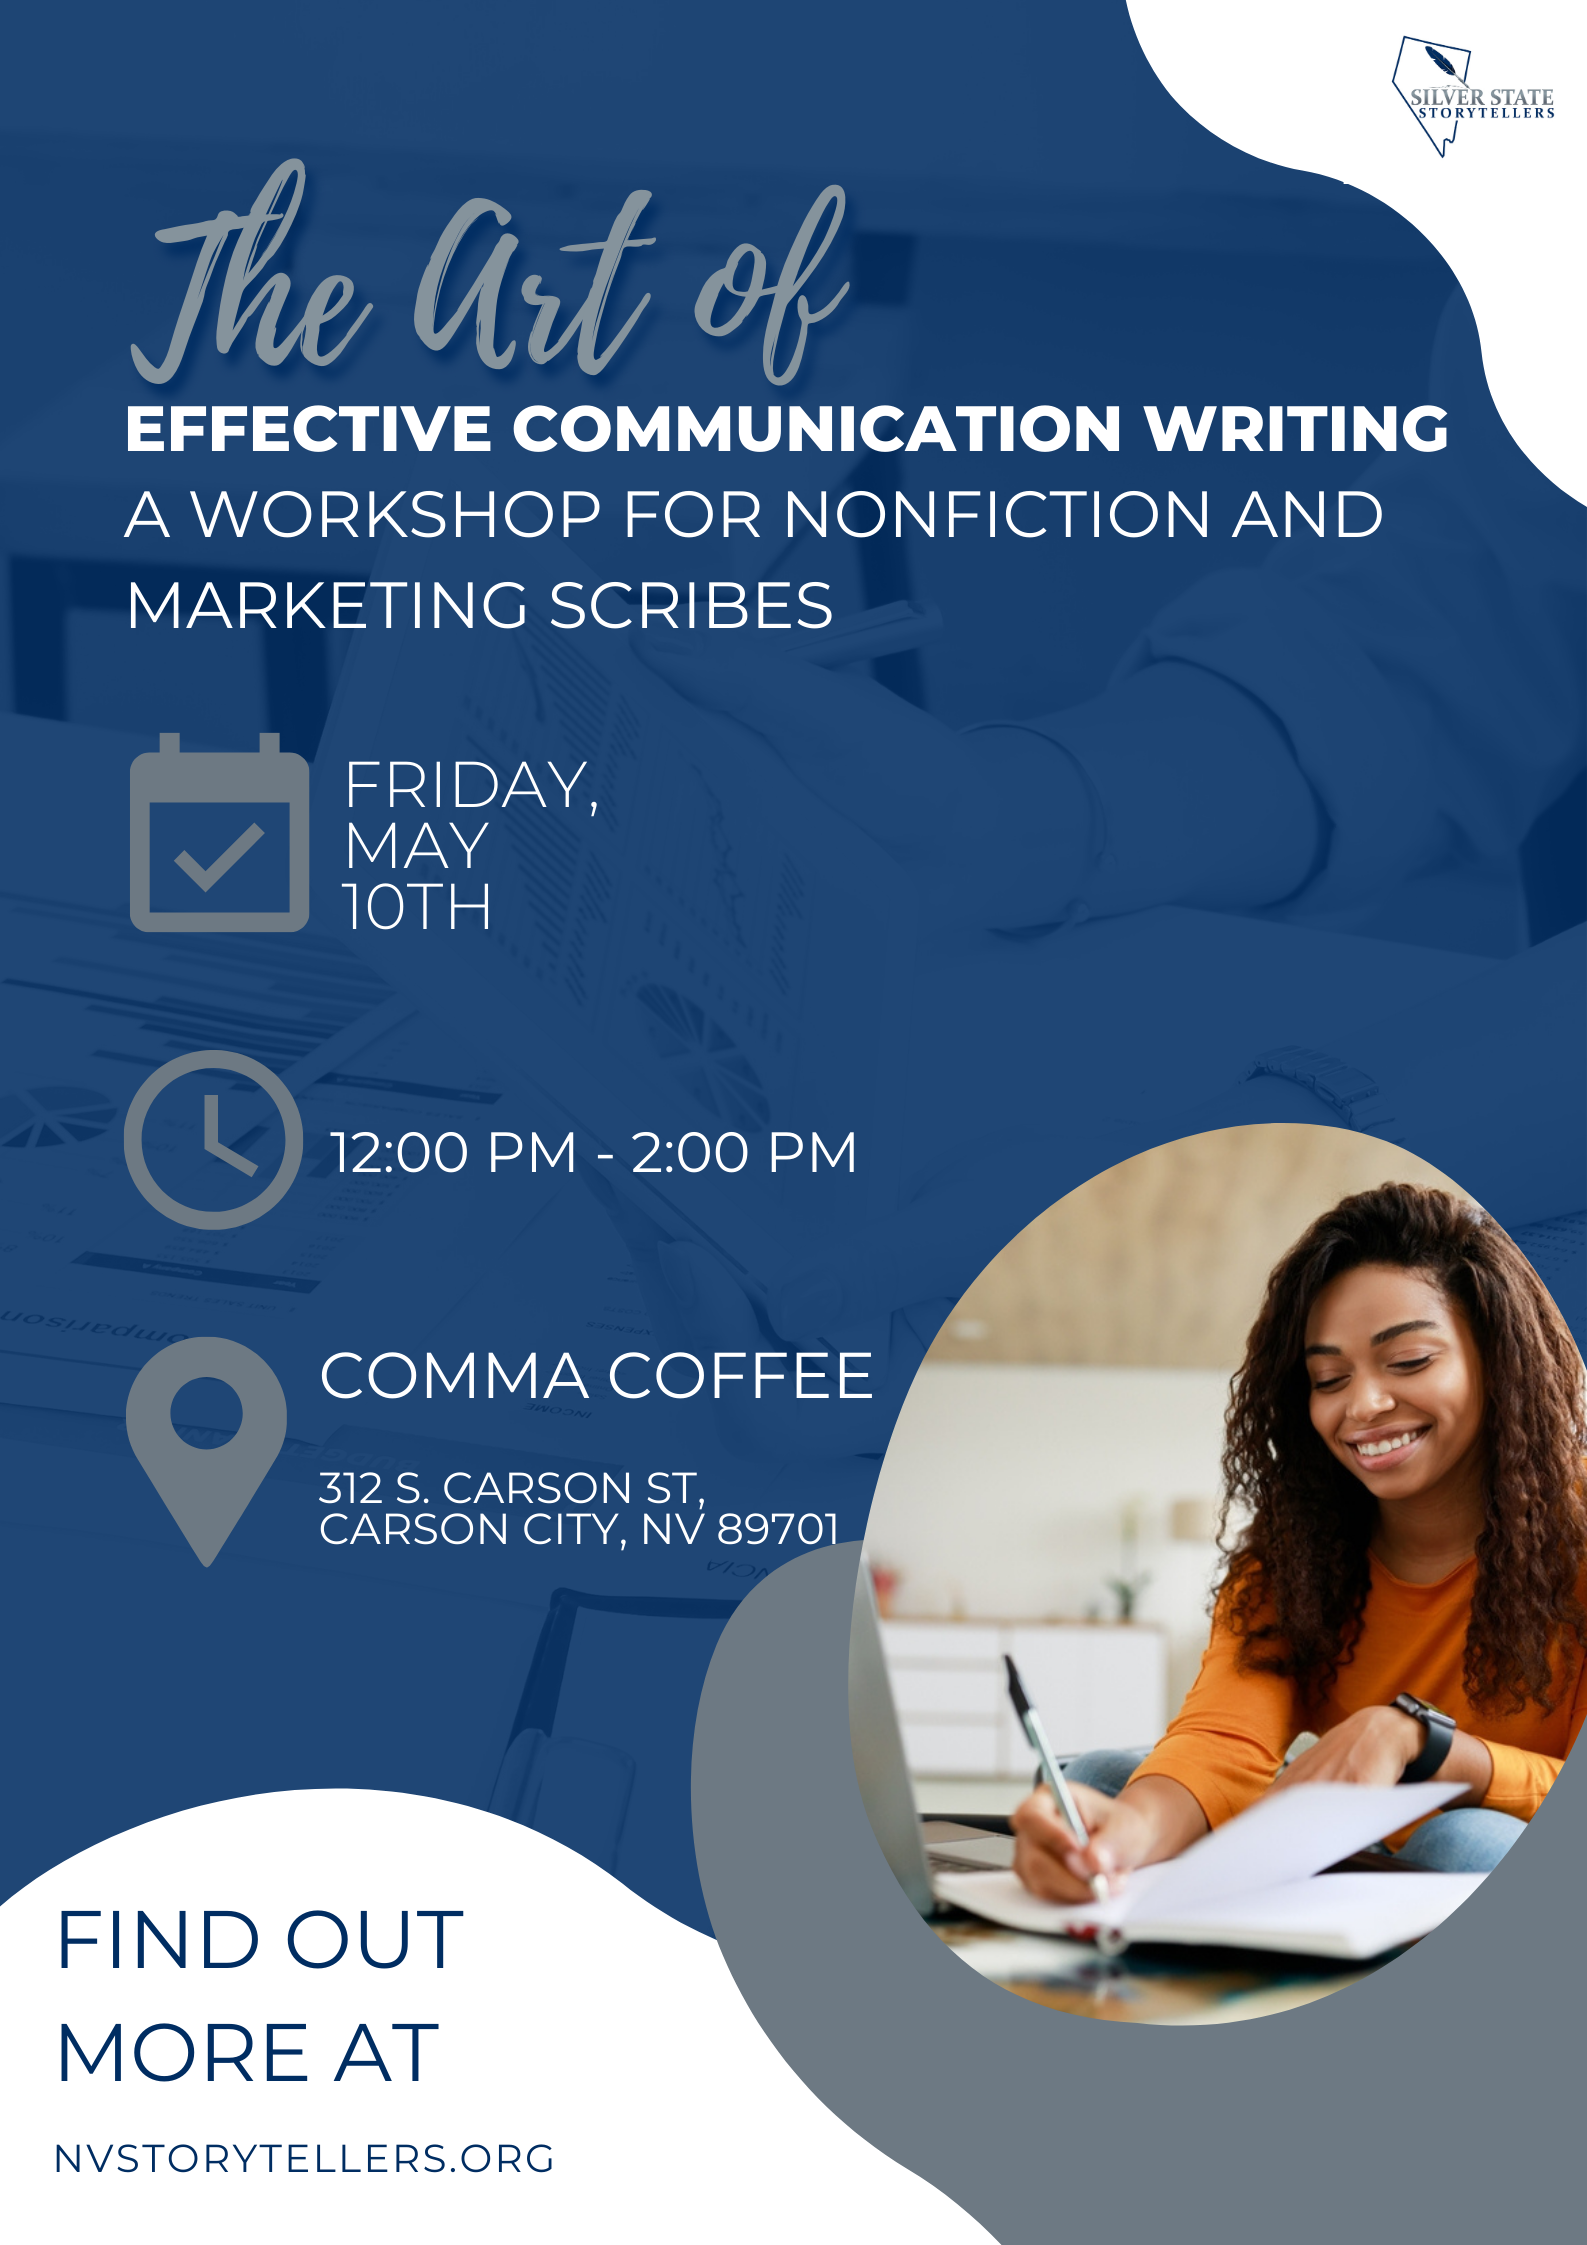 The Art of Effective Communication Writing: A Workshop for Nonfiction and Marketing Scribes